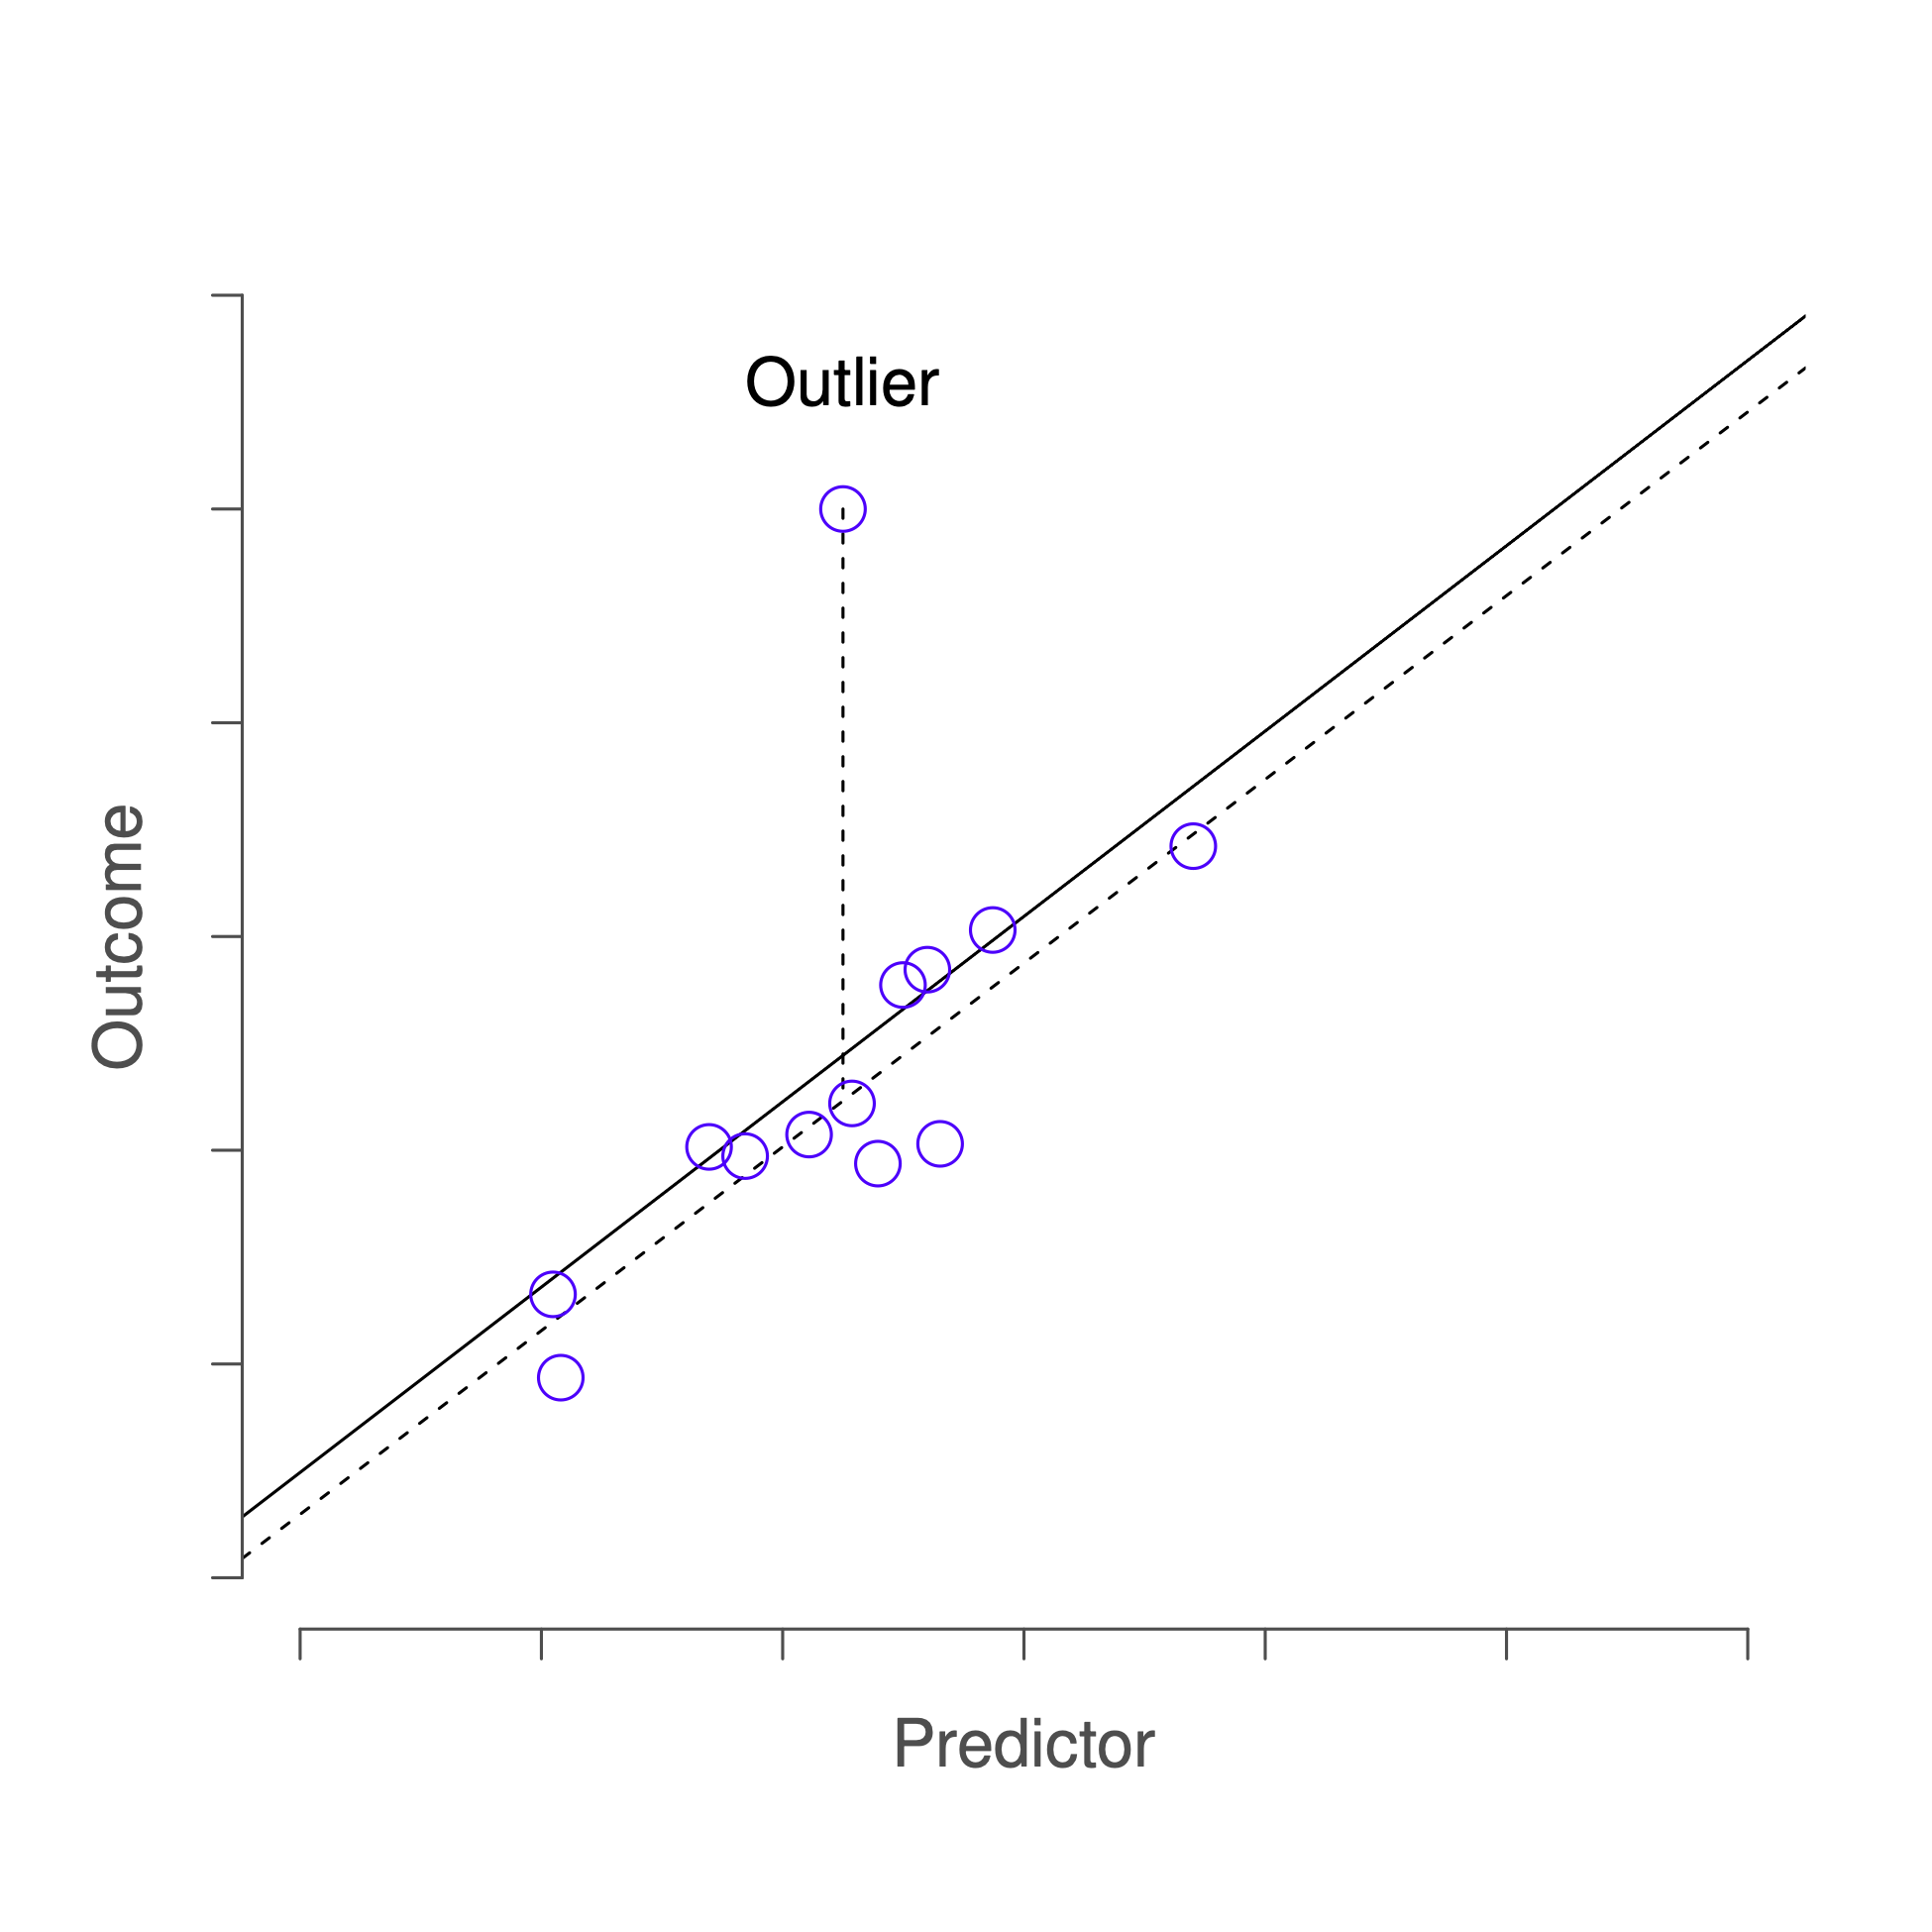 An illustration of outliers. The dotted lines plot the regression line that would have been estimated without the anomalous observation included, and the corresponding residual (i.e. the Studentised residual). The solid line shows the regression line with the anomalous observation included. The outlier has an unusual value on the outcome (y axis location) but not the predictor (x axis location), and lies a long way from the regression line.